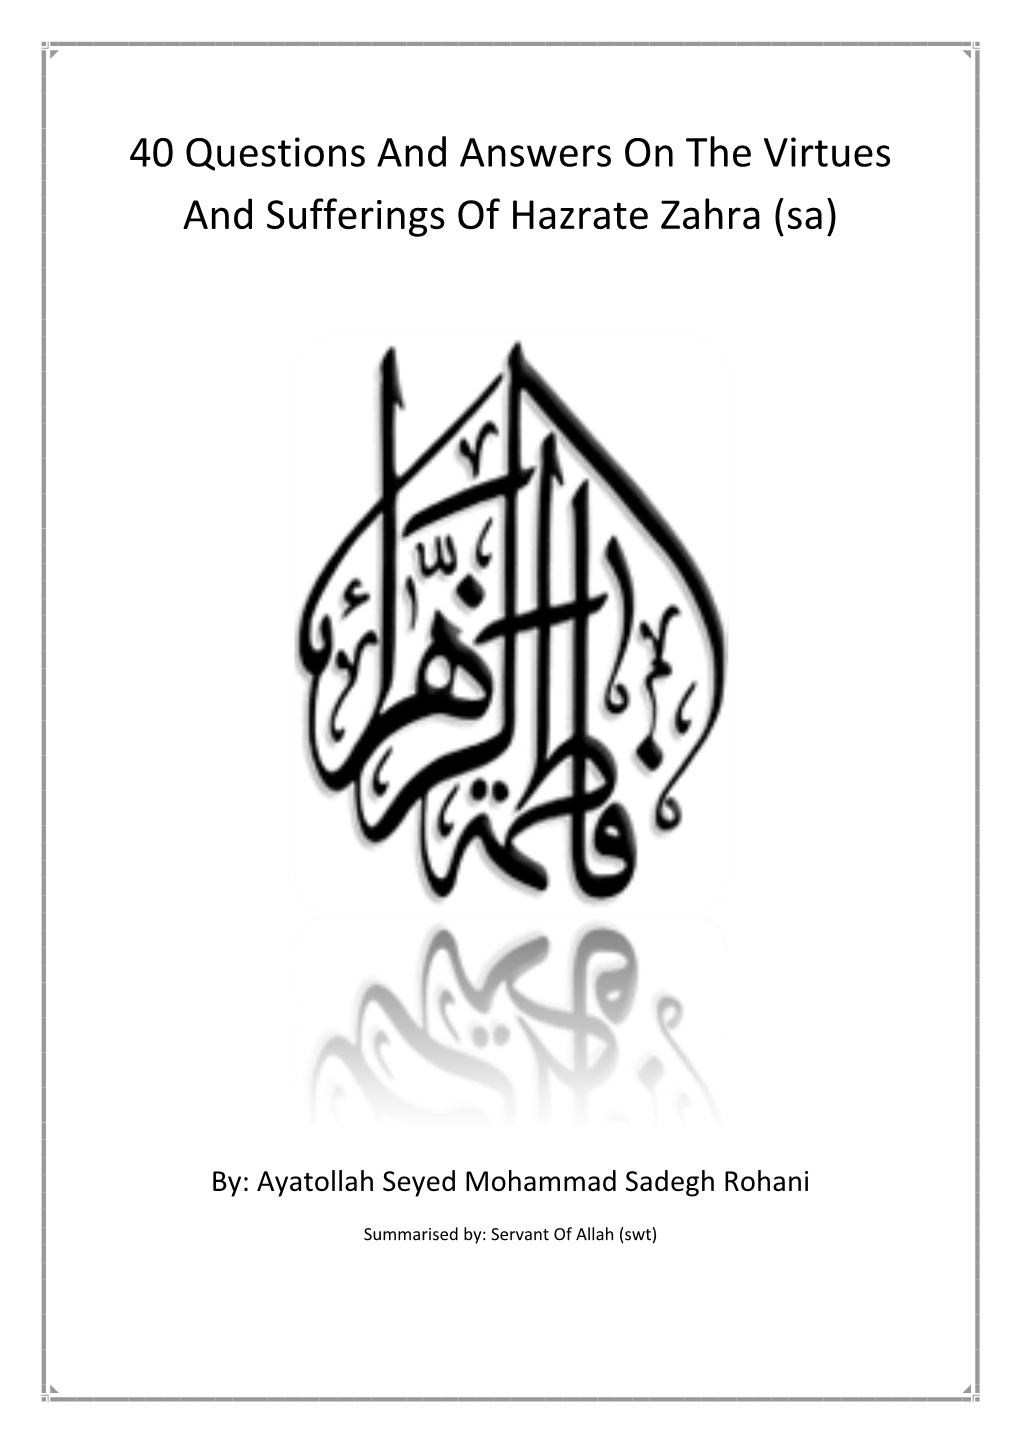 40 Questions and Answers on the Virtues and Sufferings of Hazrate Zahra (Sa)